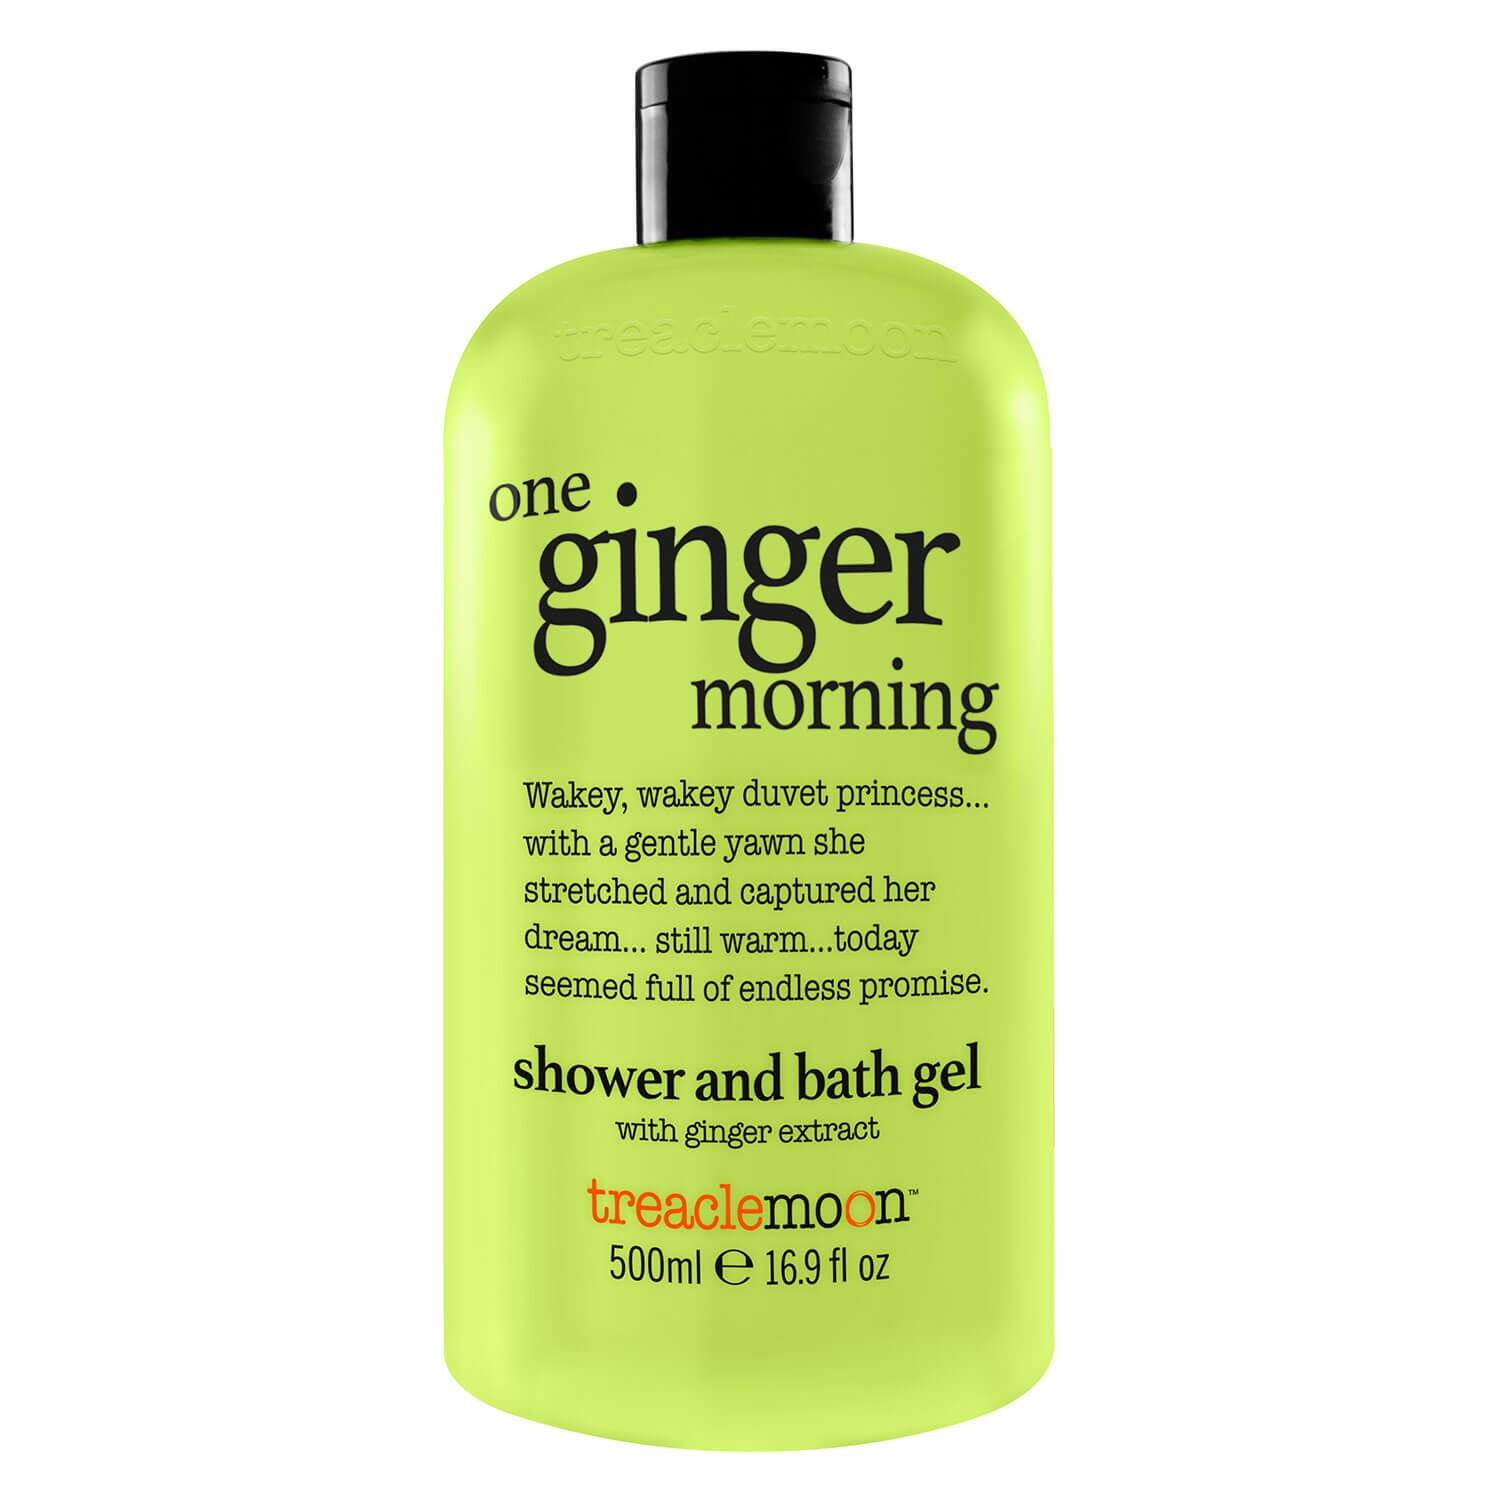 Product image from treaclemoon - one ginger morning shower and bath gel